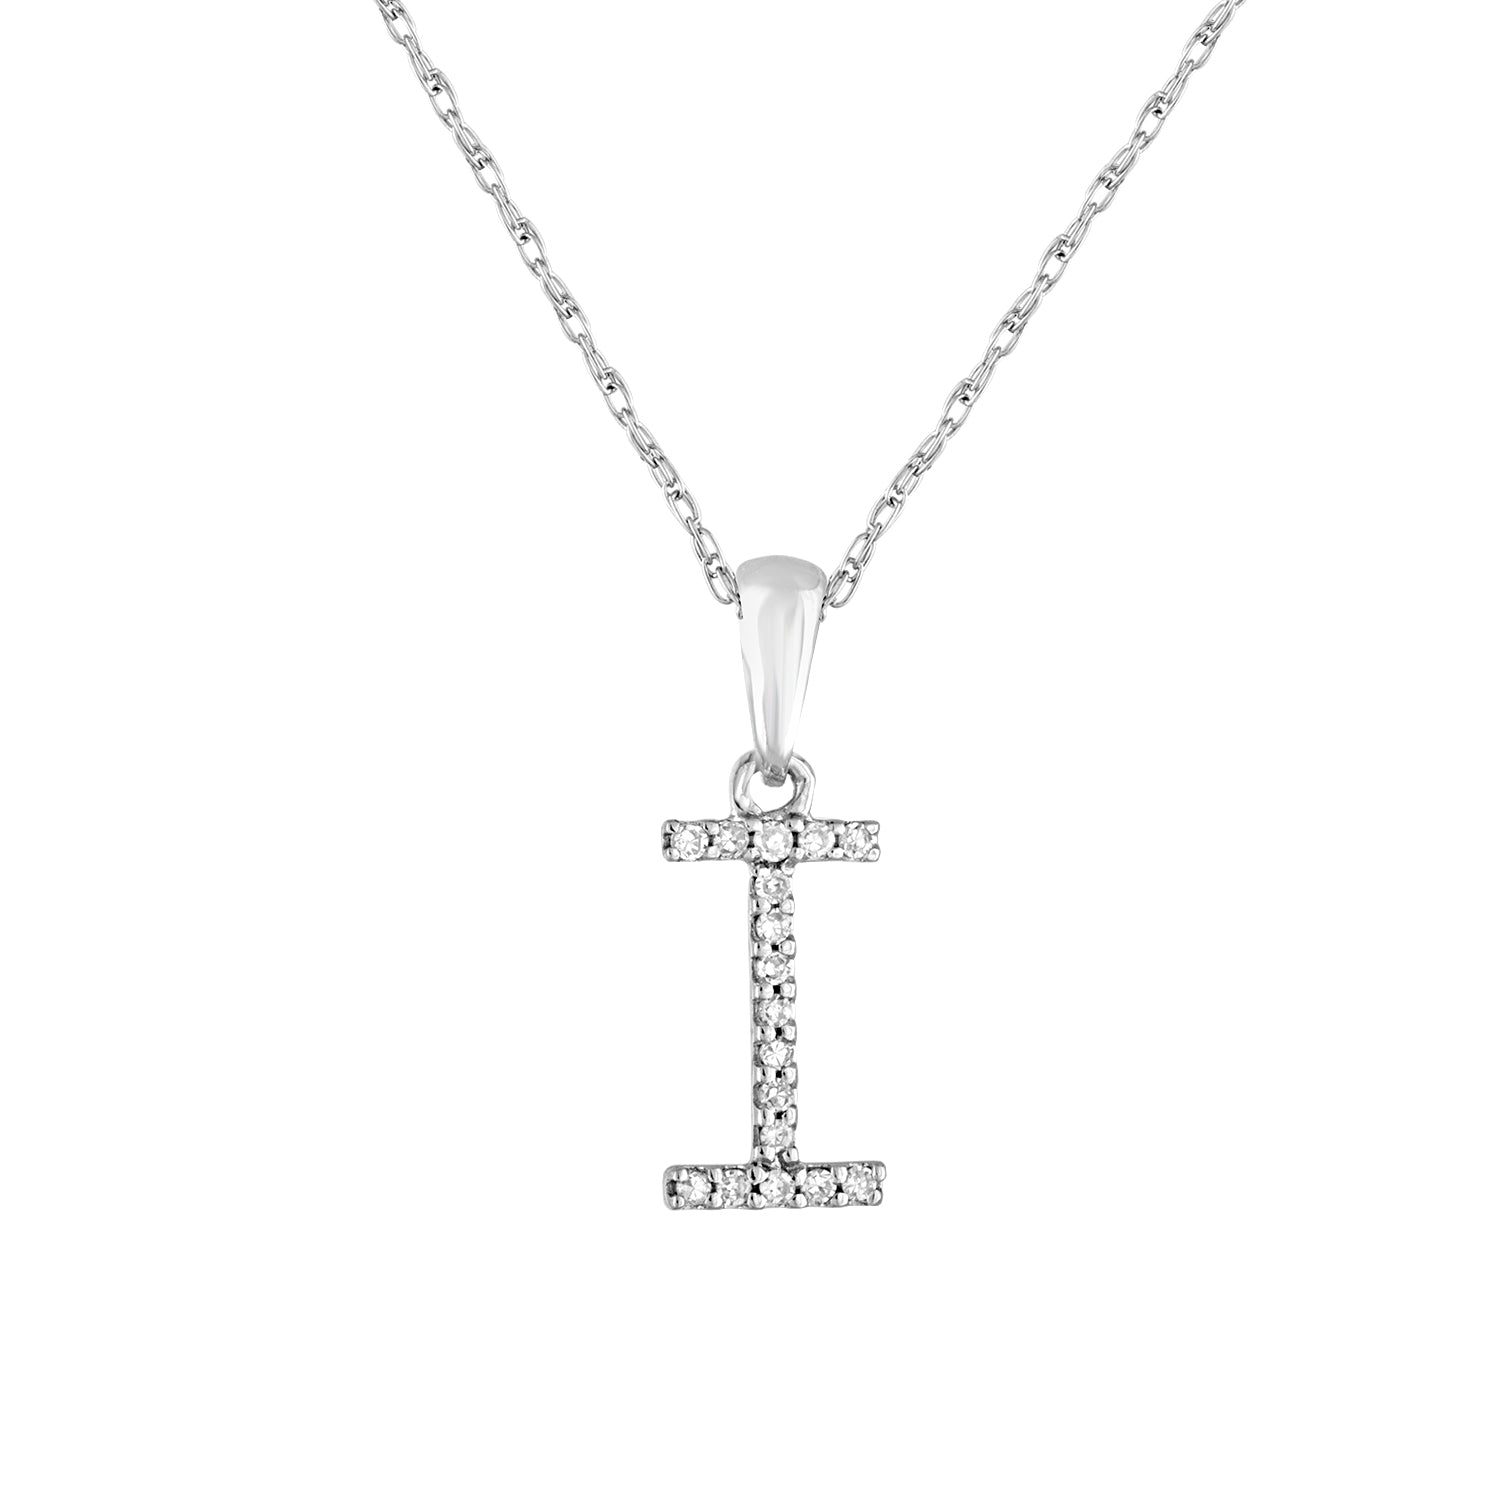 14k White Gold & Diamond Initial Necklace with Rope Chain